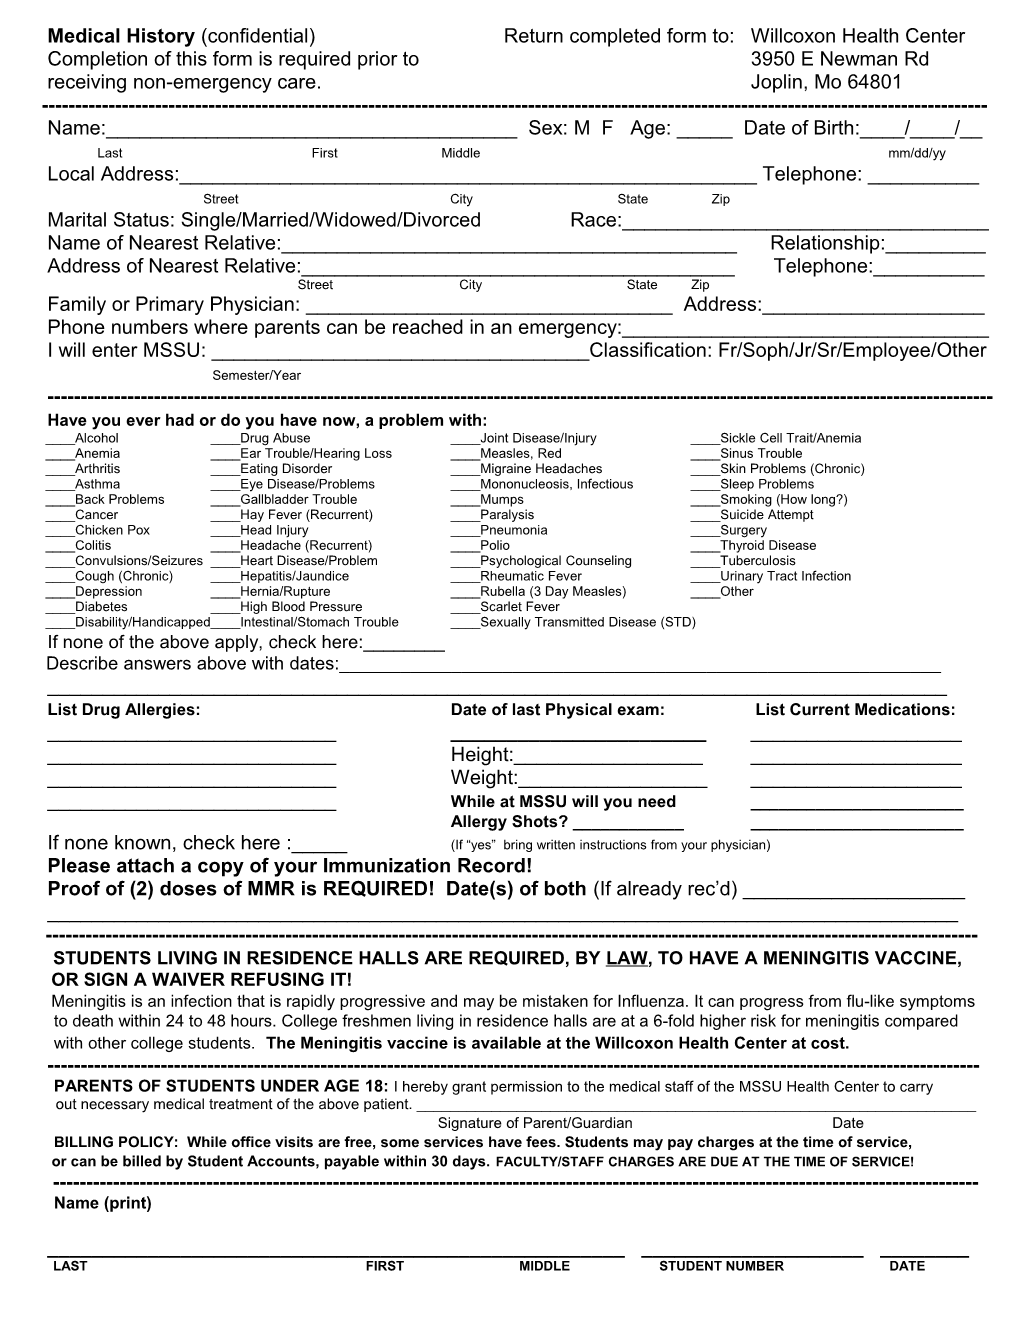 Medical History (Confidential) Return Completed Form To: MSSU Health Center